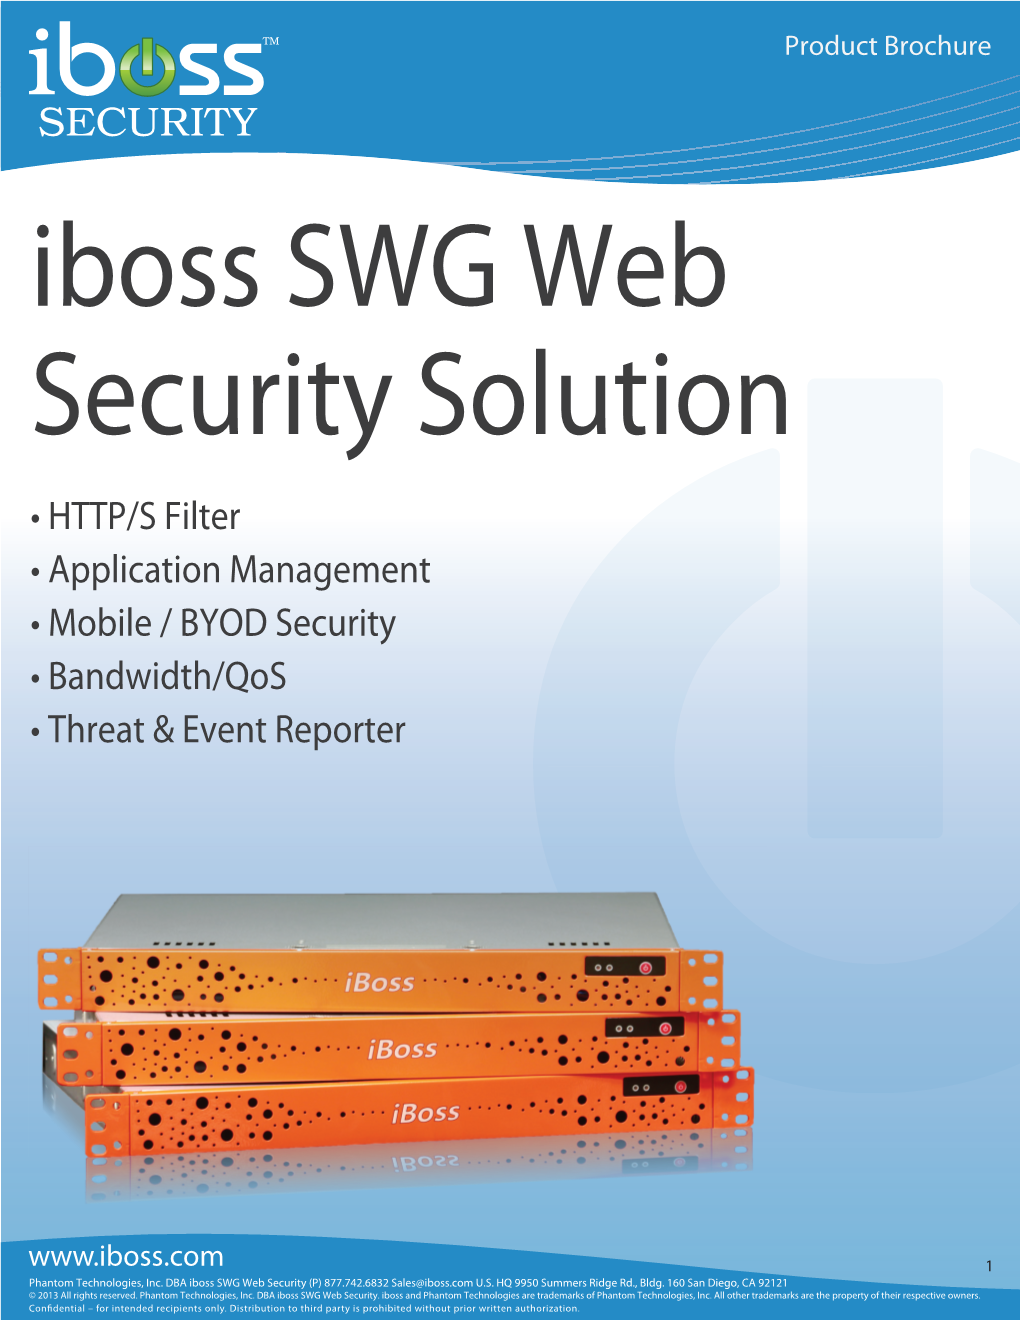 Iboss SWG Web Security Solution • HTTP/S Filter • Application Management • Mobile / BYOD Security • Bandwidth/Qos • Threat & Event Reporter